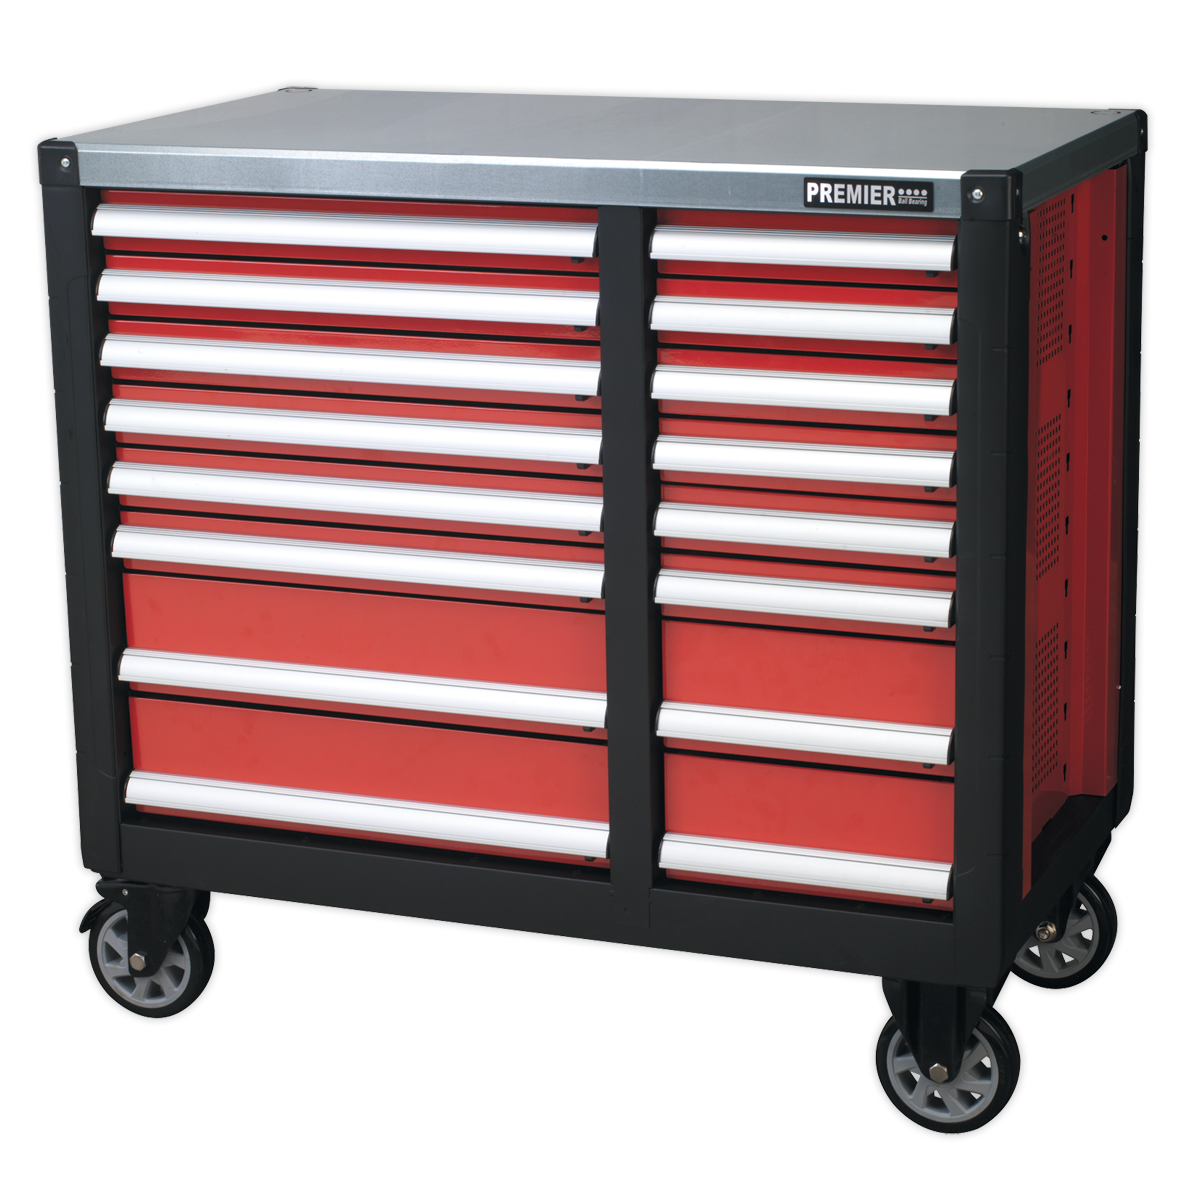 Sealey Mobile Workstation 16 Drawer with Ball-Bearing Slides